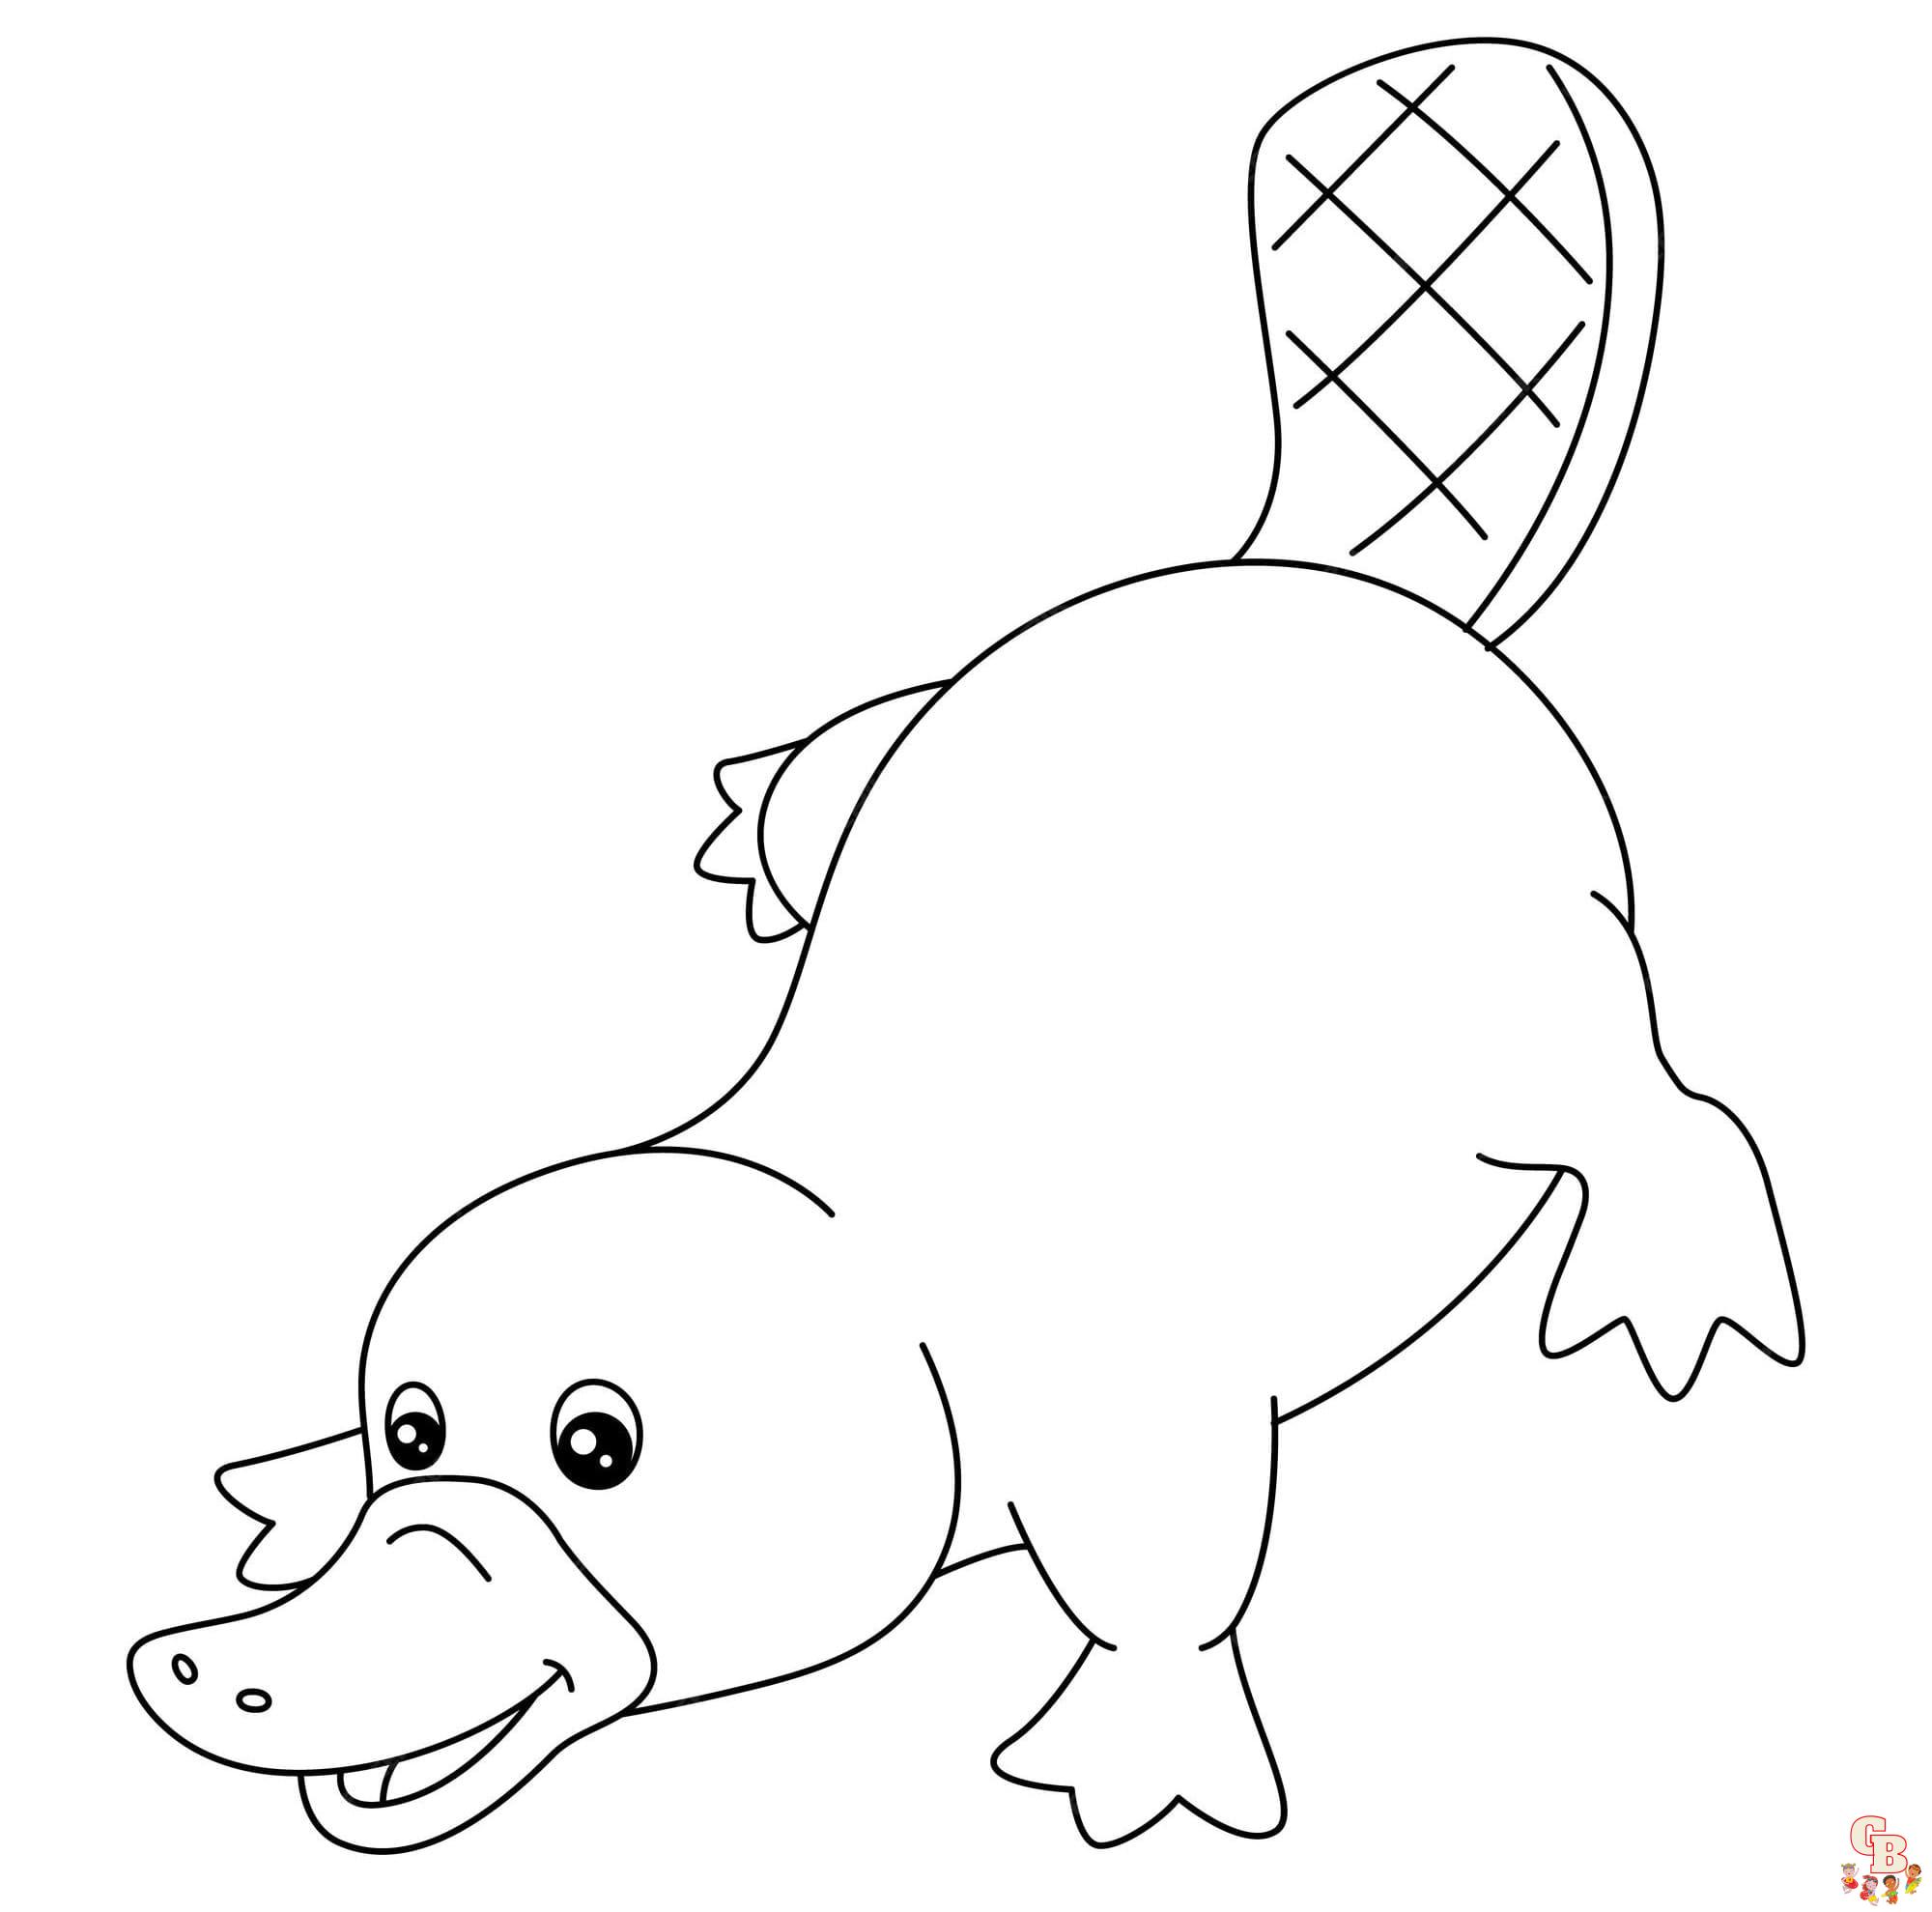 Platypus coloring pages printable free